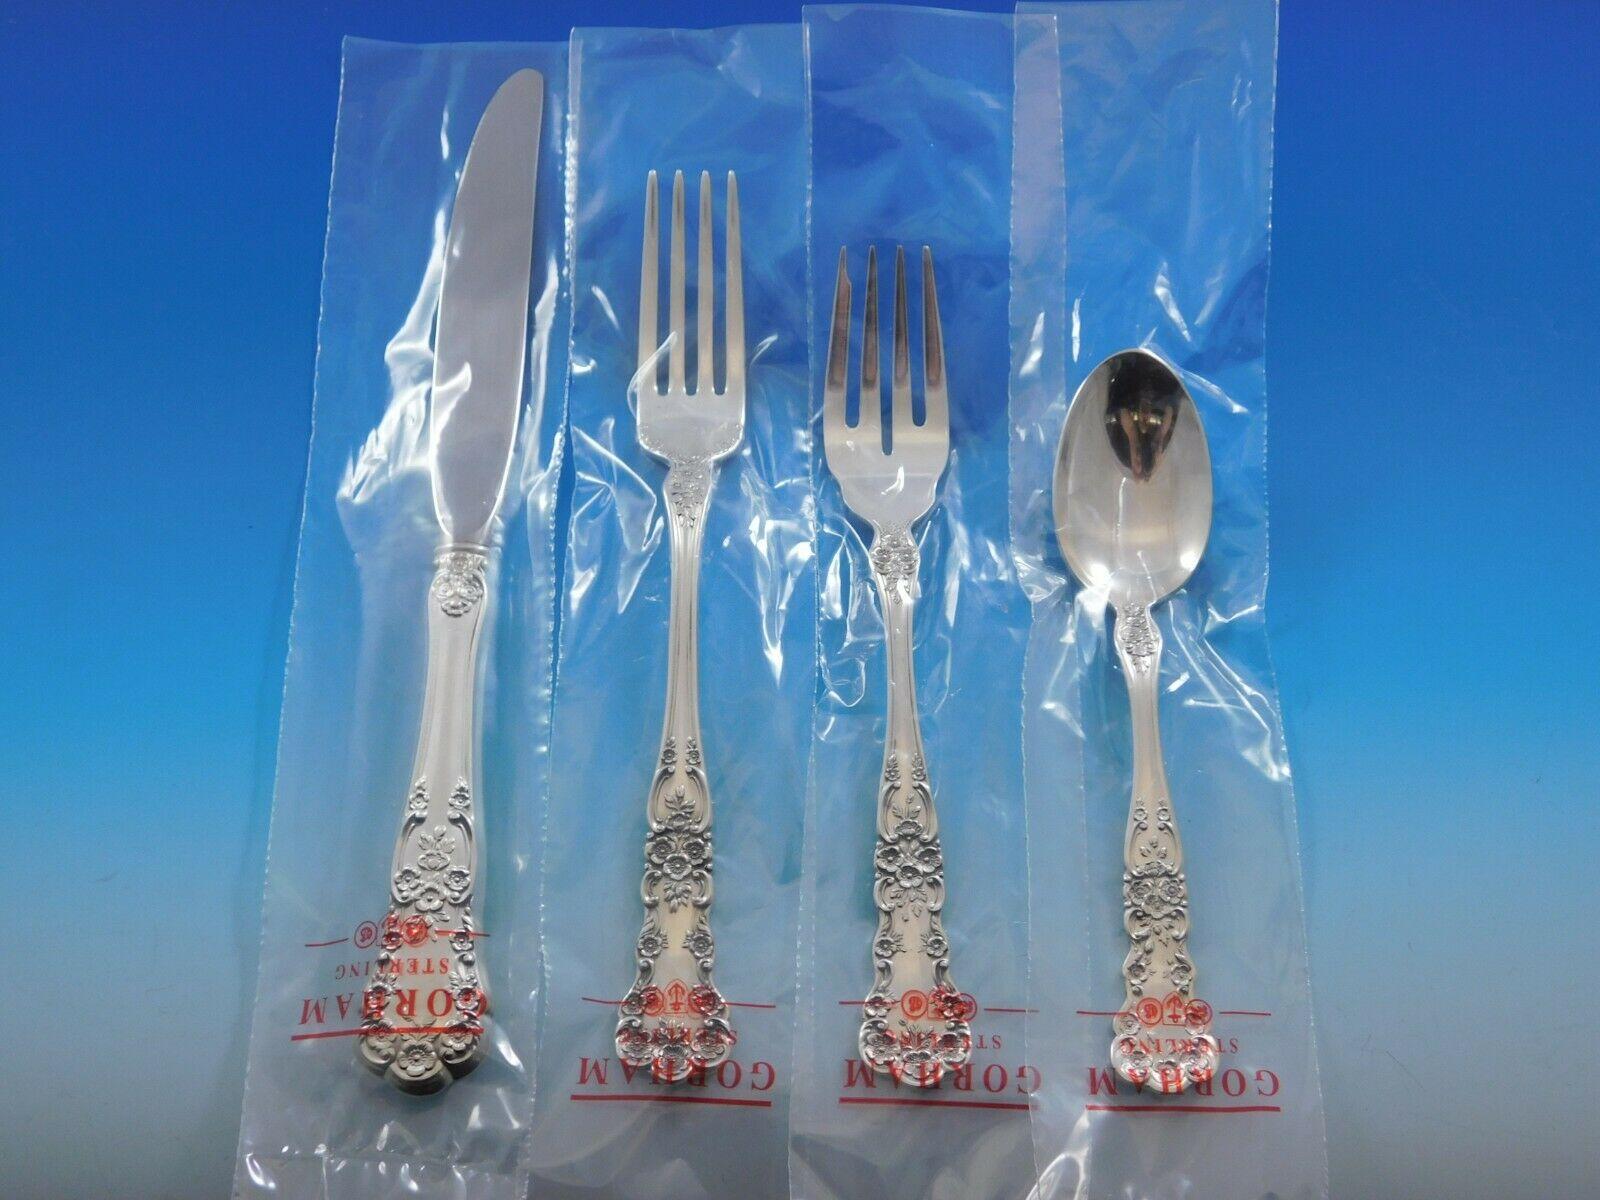 New, unused Buttercup by Gorham sterling silver place size flatware set, 32 pieces. This set includes:

Eight place size knives, 9 1/4